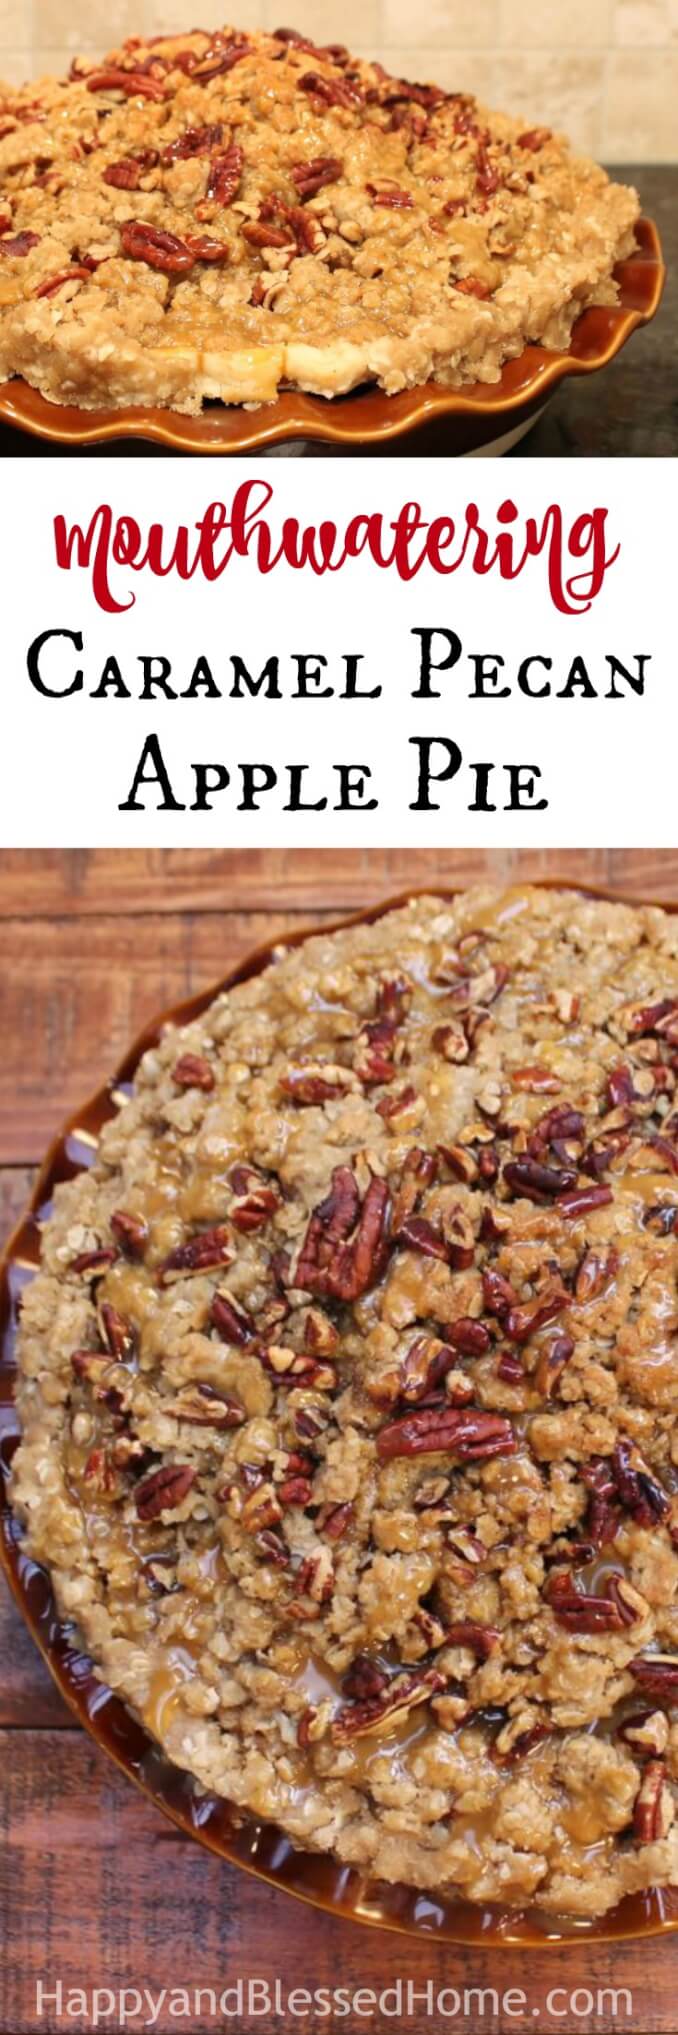 Mouthwatering Caramel Pecan Apple Pie - This is the pie your relatives will eat in disbelief. Perfect for any holiday meal. Our family enjoys it every Christmas and Thanksgiving. The WOW factor of this apple pie comes from the sheer volume of loads of peeled and sliced apples piled high enough to create a pie mountain.